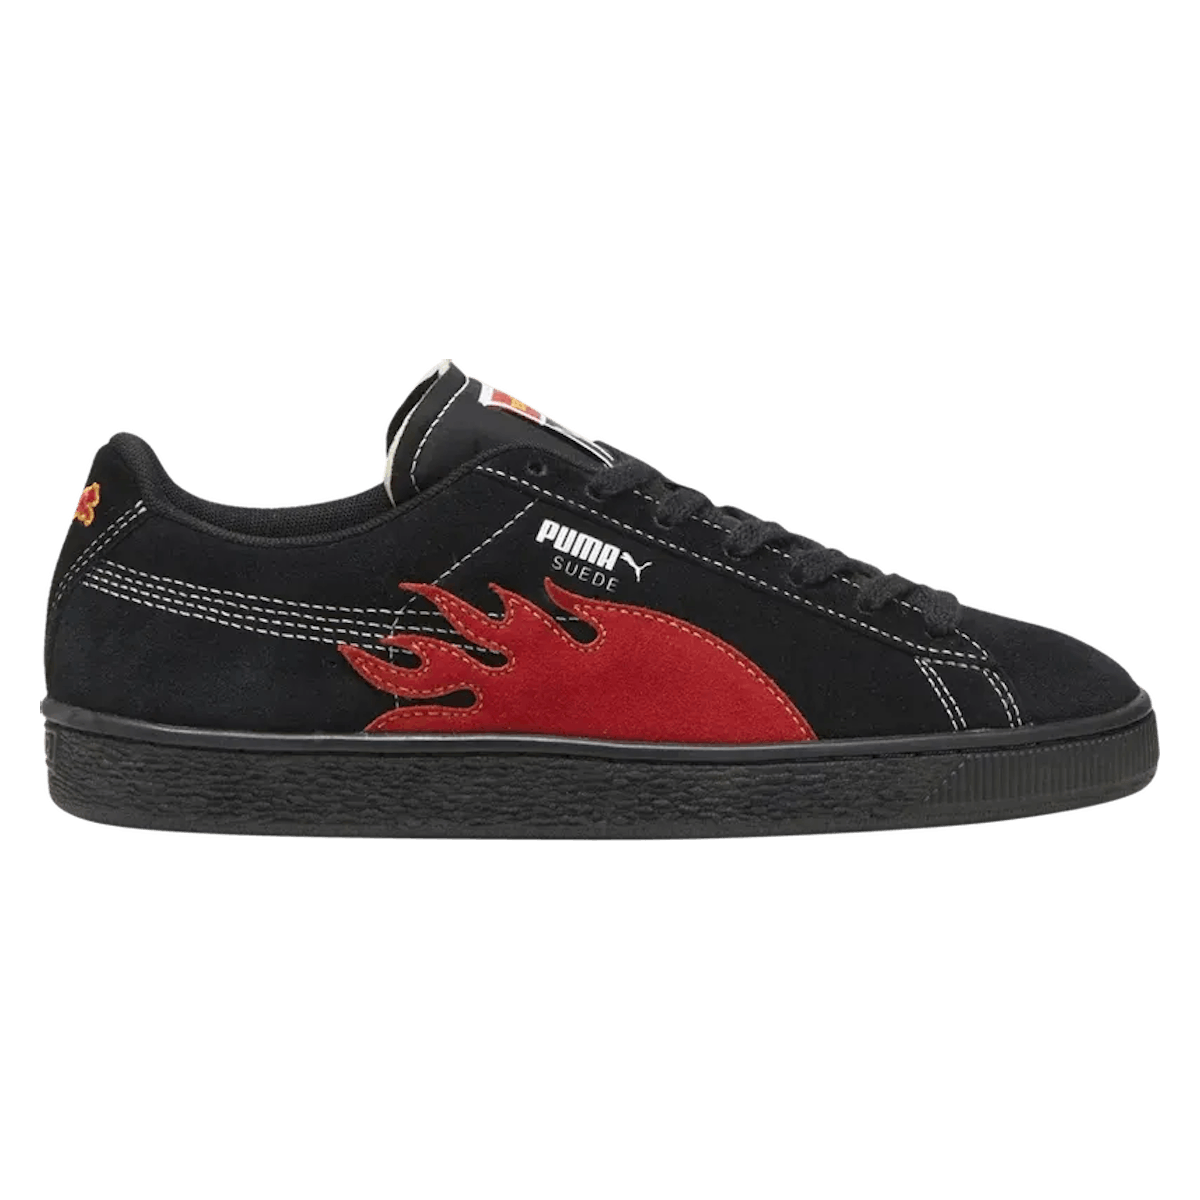 Butter Goods x Puma Suede Classic "Flame"